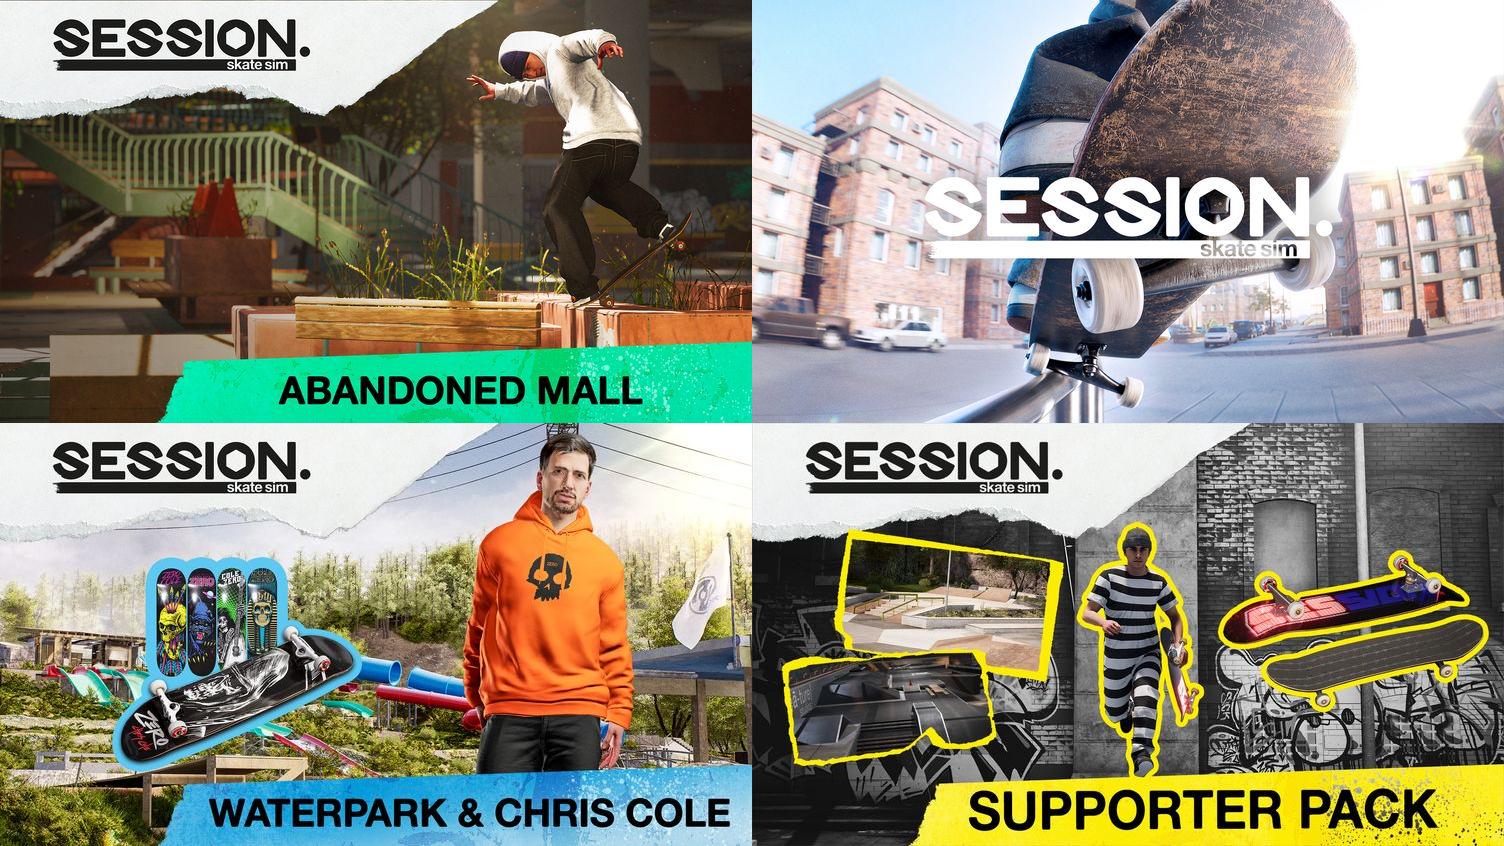 Session: Skate Sim Abandoned Mall on Steam